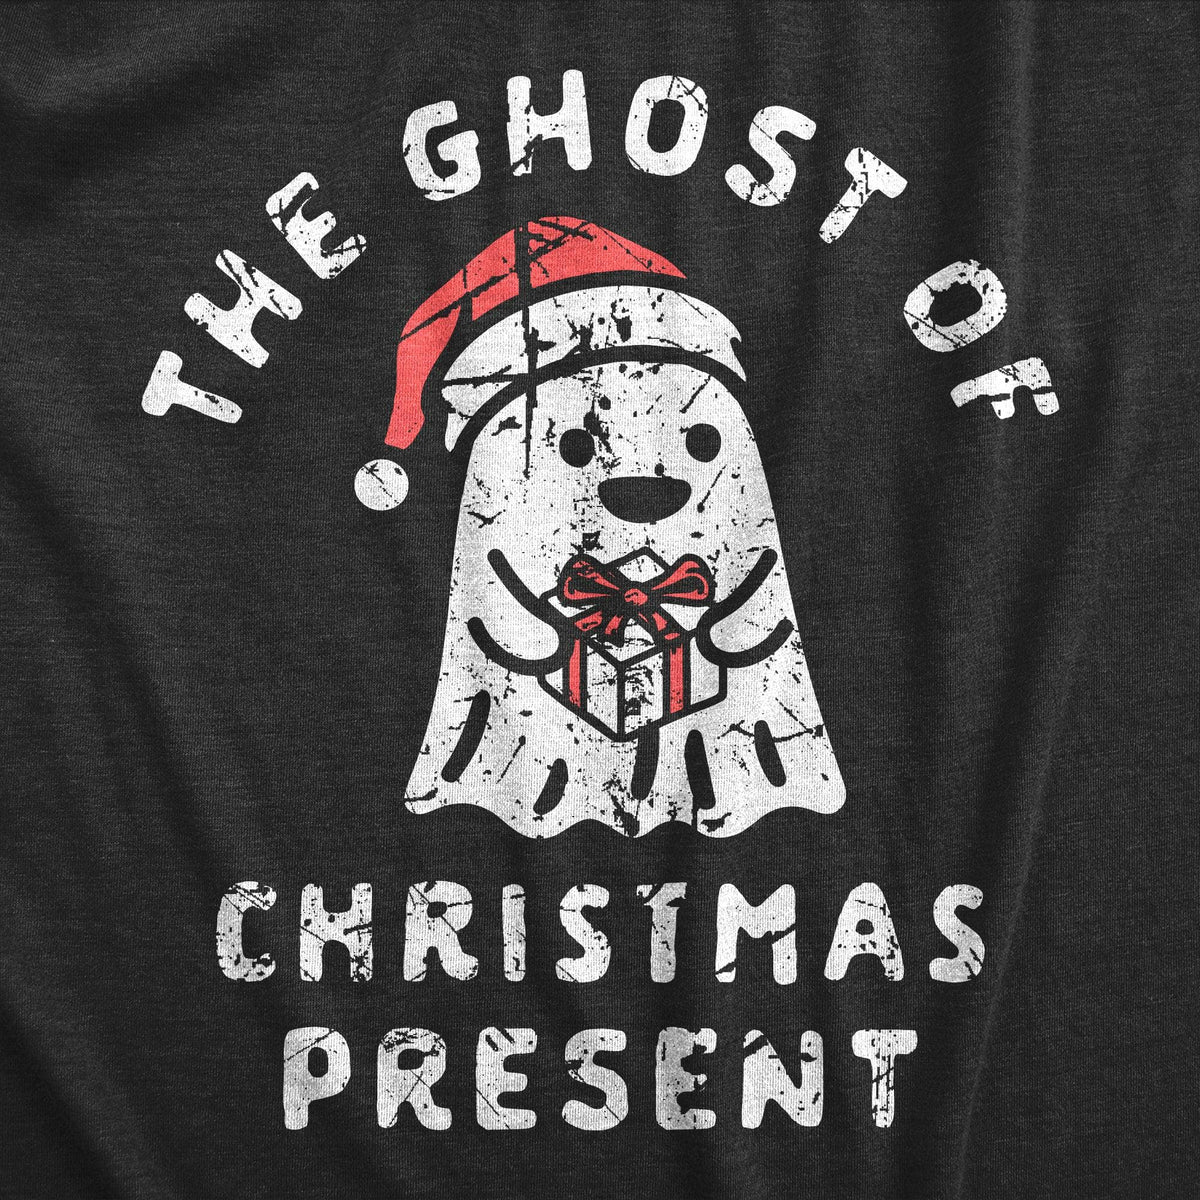 The Ghost Of Christmas Present Women&#39;s Tshirt  -  Crazy Dog T-Shirts